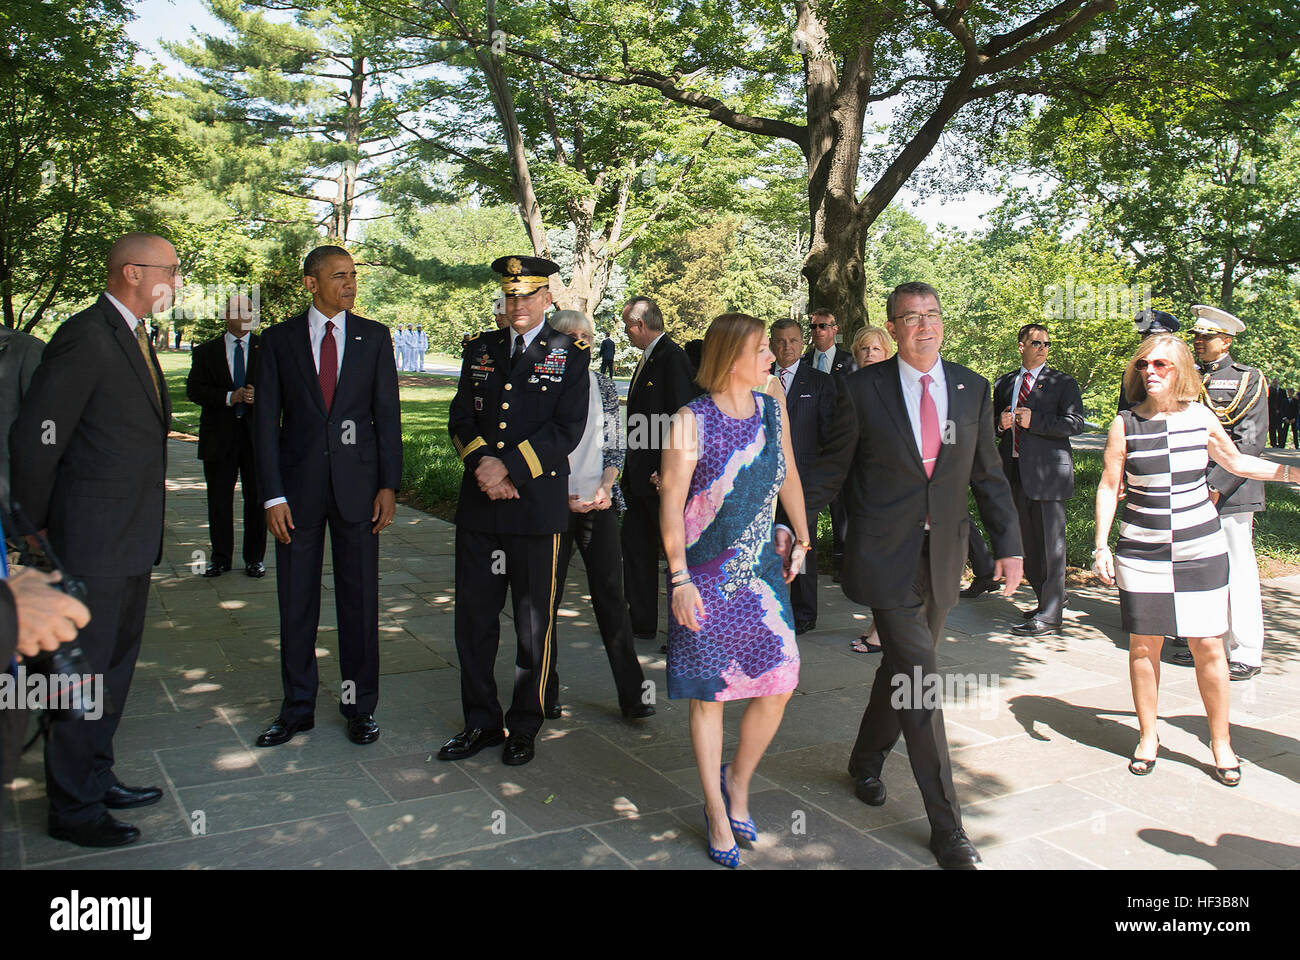 Secretary of Defense Ash Carter and his wife attend a ceremony at Arlington National Cemetery in Arlington, Va., where President Barack Obama placed a wreath at the Tomb of the Unknown Soldier to observe Memorial Day, May 25, 2015. (Photo by Master Sgt. Adrian Cadiz)(Released) SD attends Memorial Day Ceremony 150525-D-DT527-112 Stock Photo